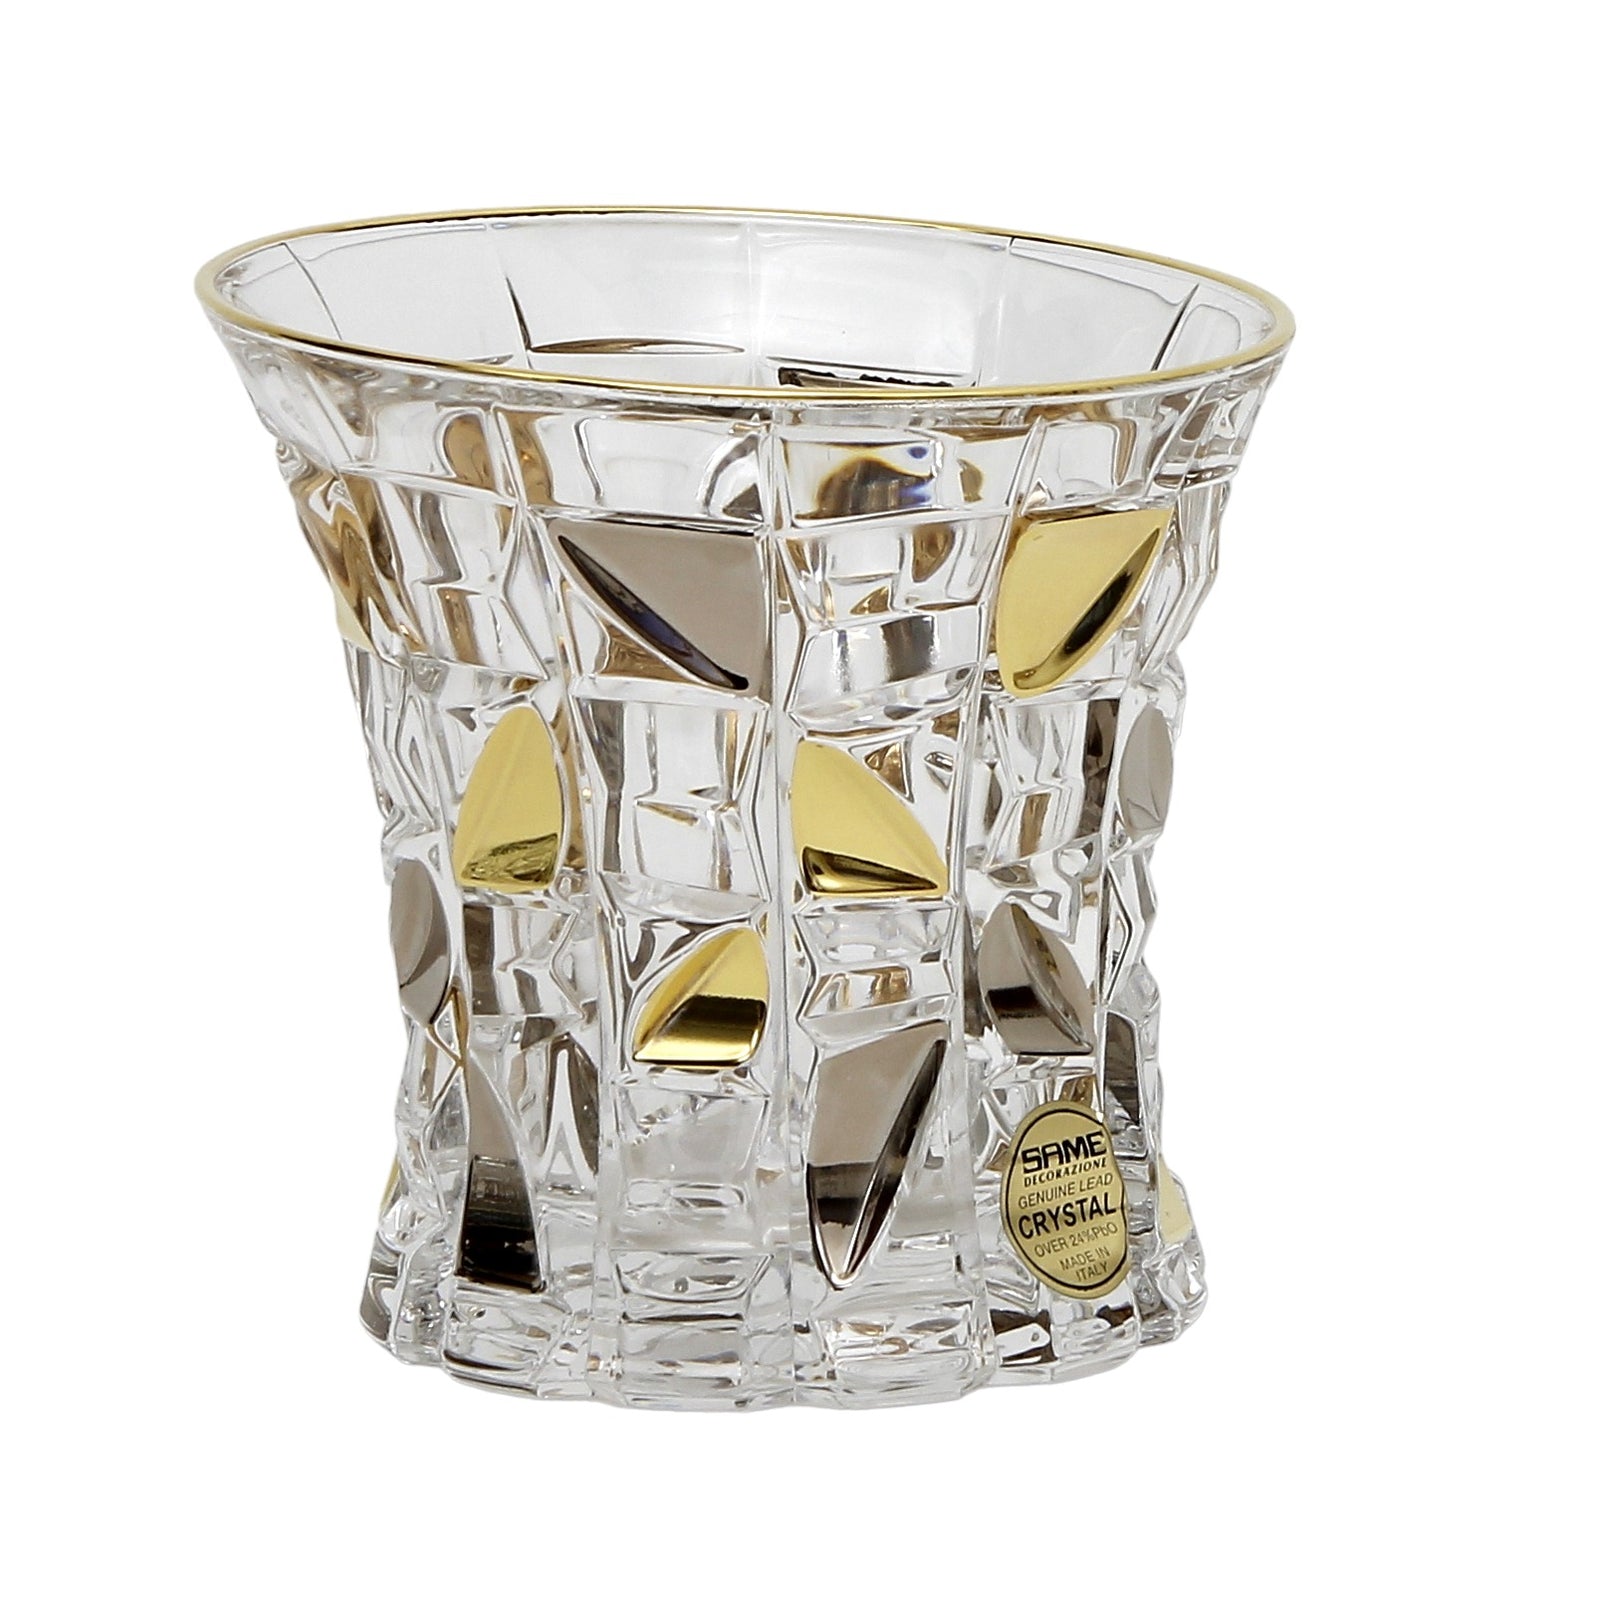 CRYSTAL GLASS: Exquisite Italian Crystal Top Cut Glass for Whiskey/Old Fashion featuring a 24 Carat Gold Rim and Gold/Platinum Accents.